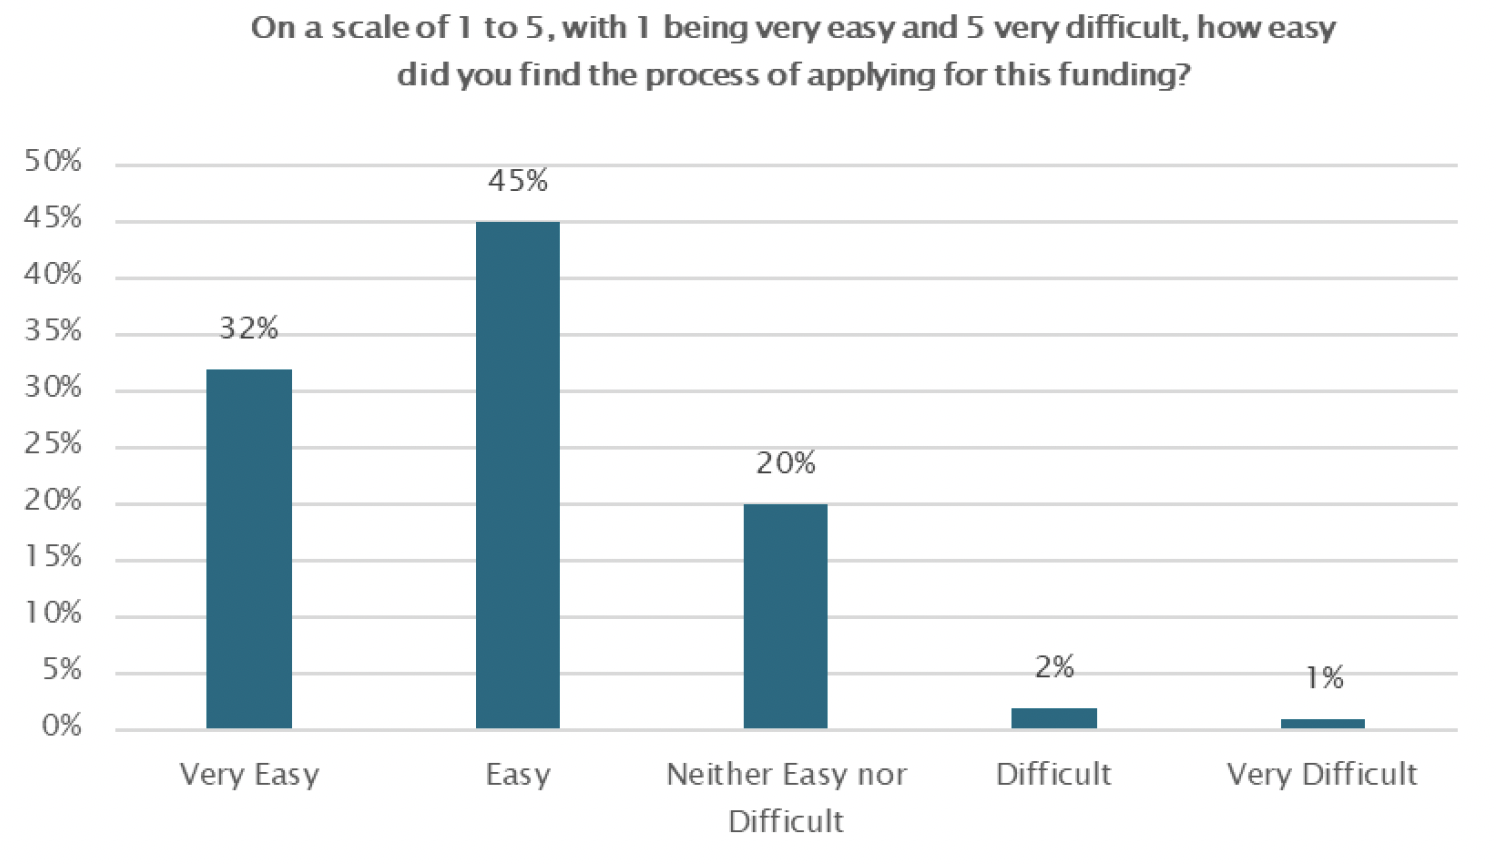 32% found it applying very easy. 45% found it easy. 20% said it was neither easy nor difficult. 2% found it difficult. 1% said it was very difficult.